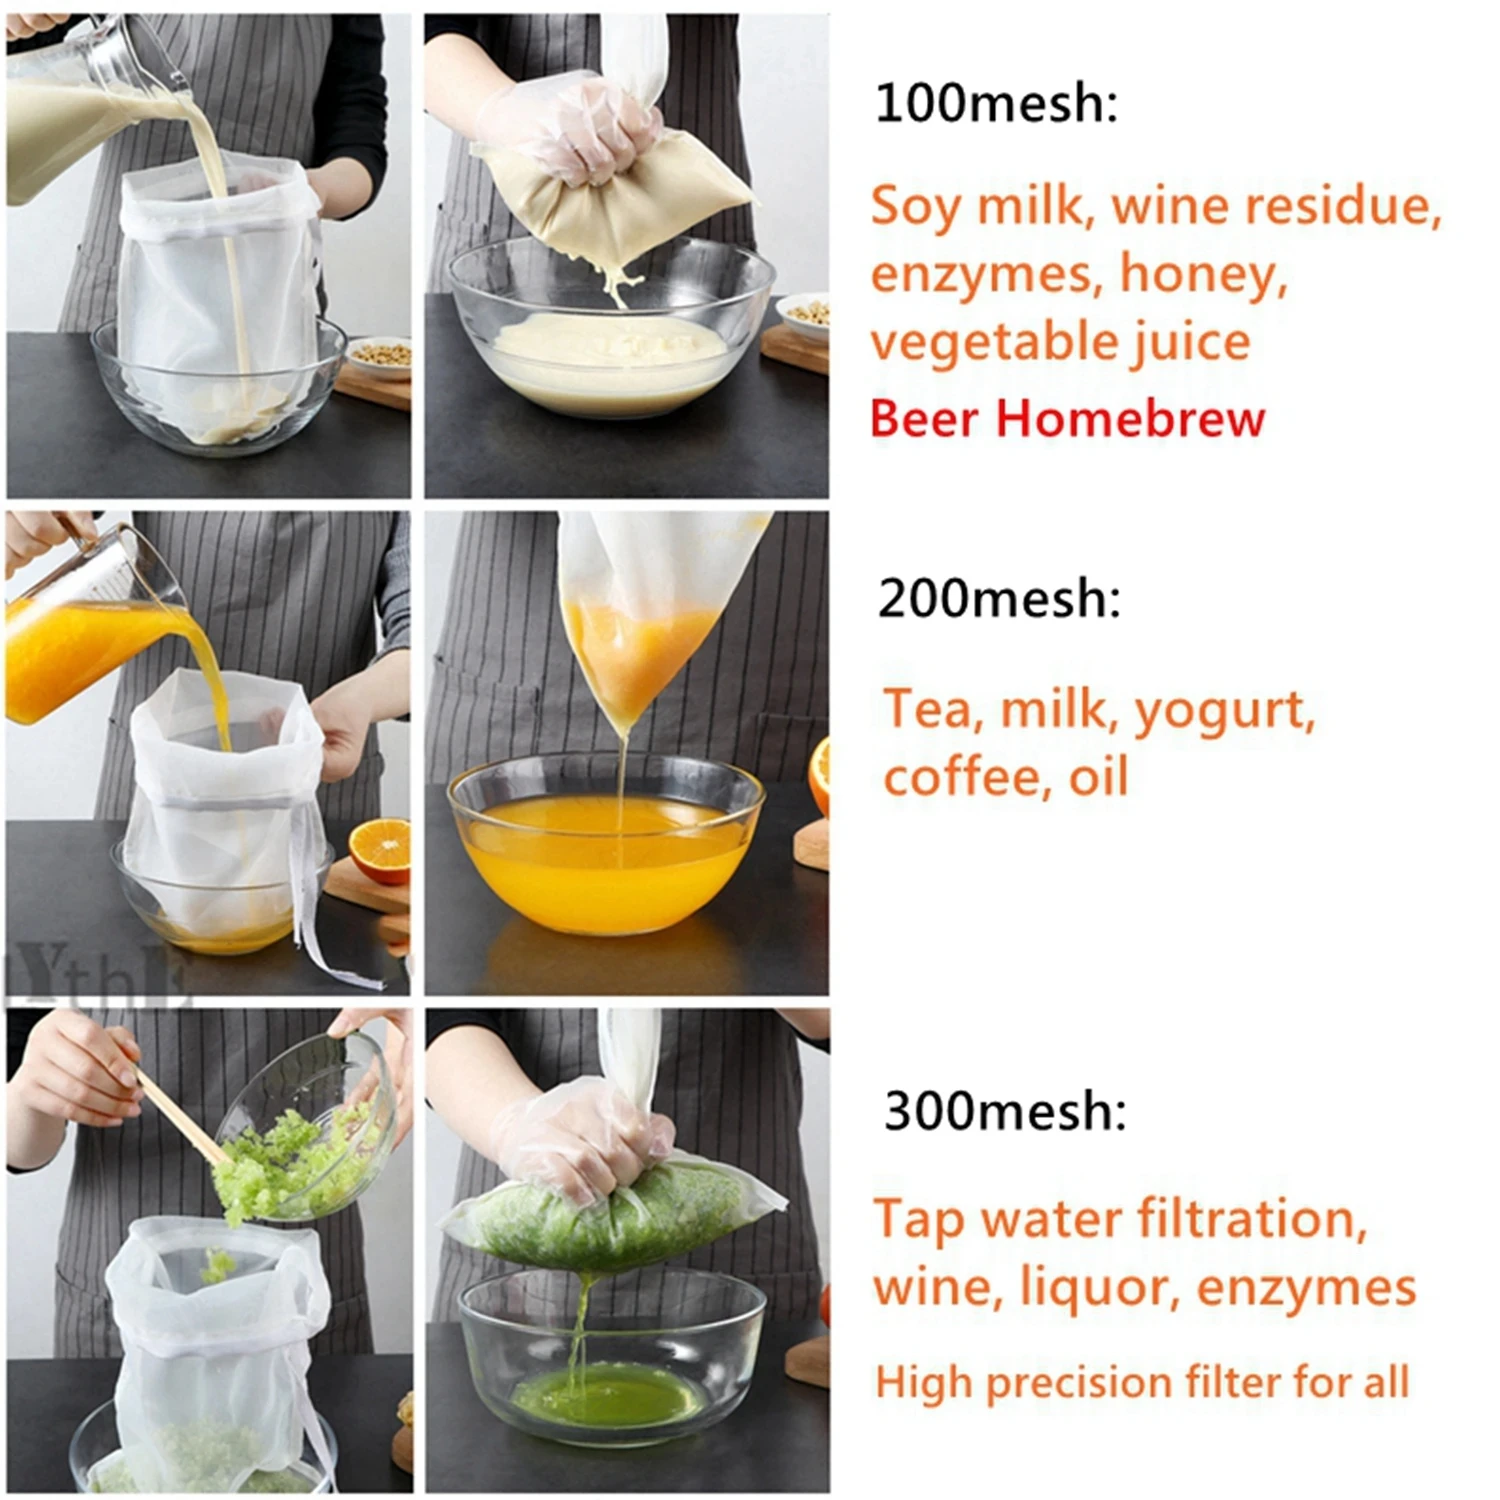 100/200/300 Mesh Reusable Nylon Filter Bags Net milk tea wine soy Coffee Filter Strainer Bag Screen Drain For Food Cheese Cloth images - 6